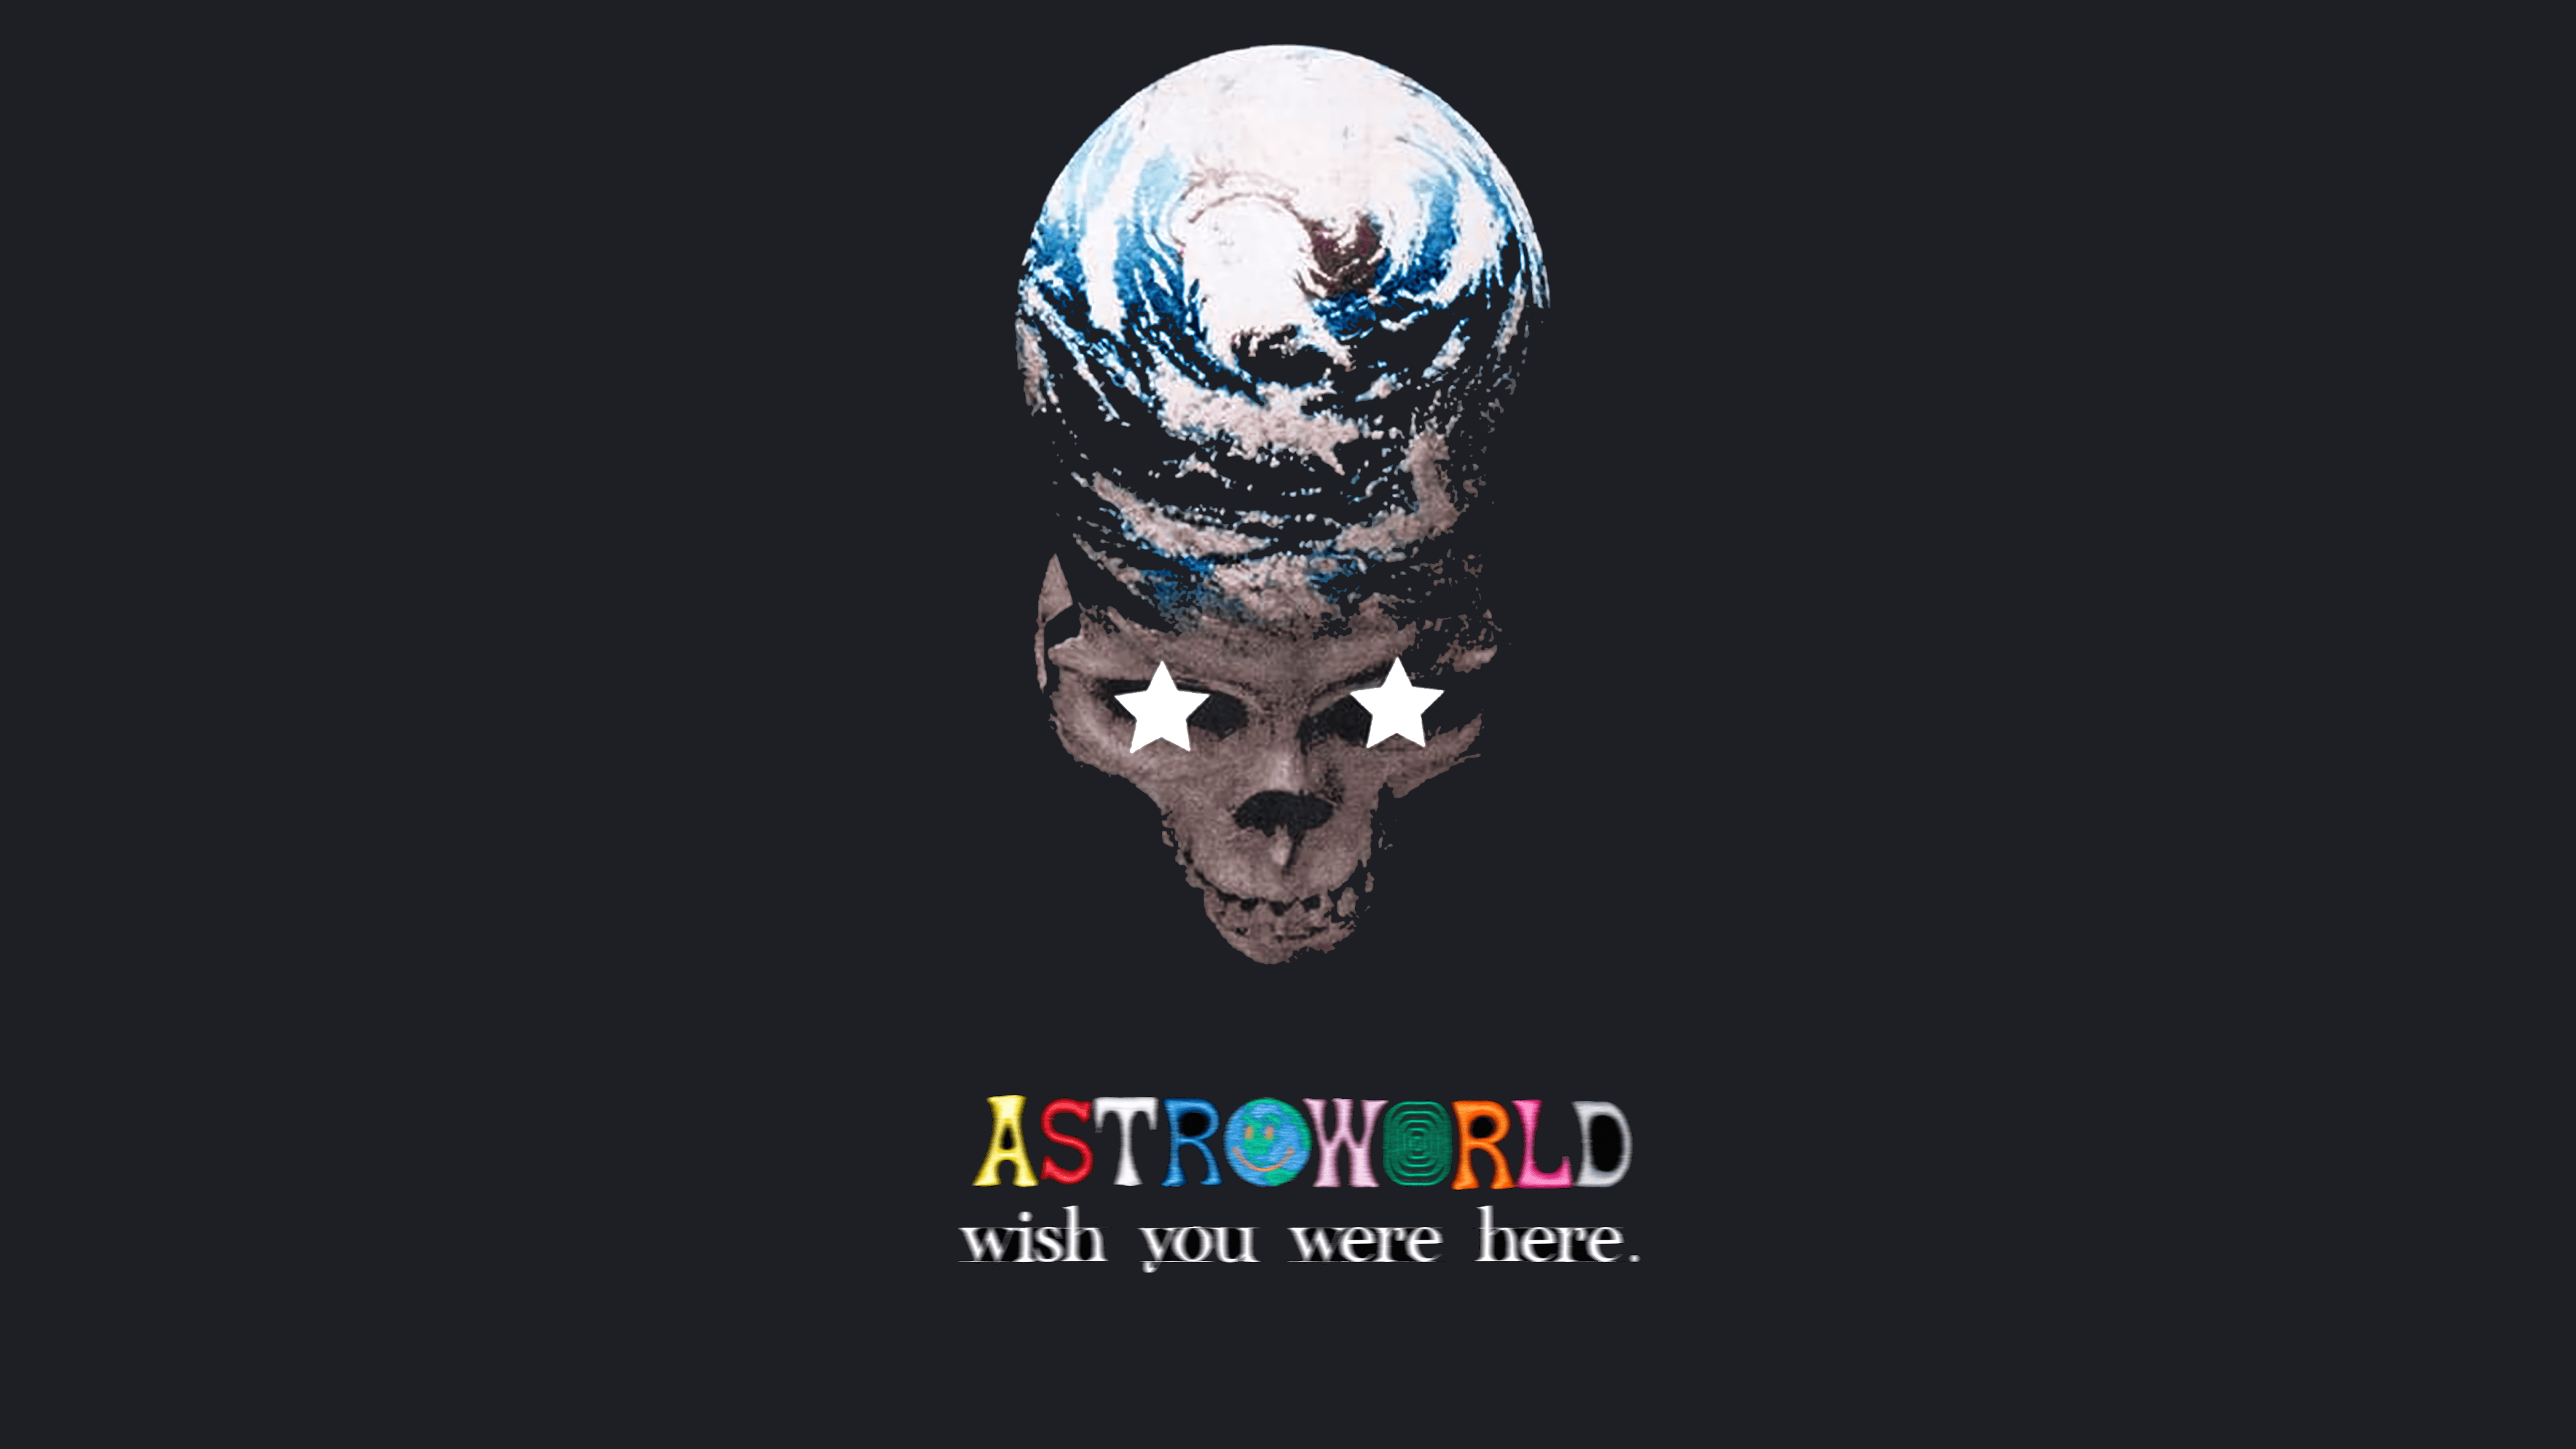 Made this Astroworld wallpaper based off the merch